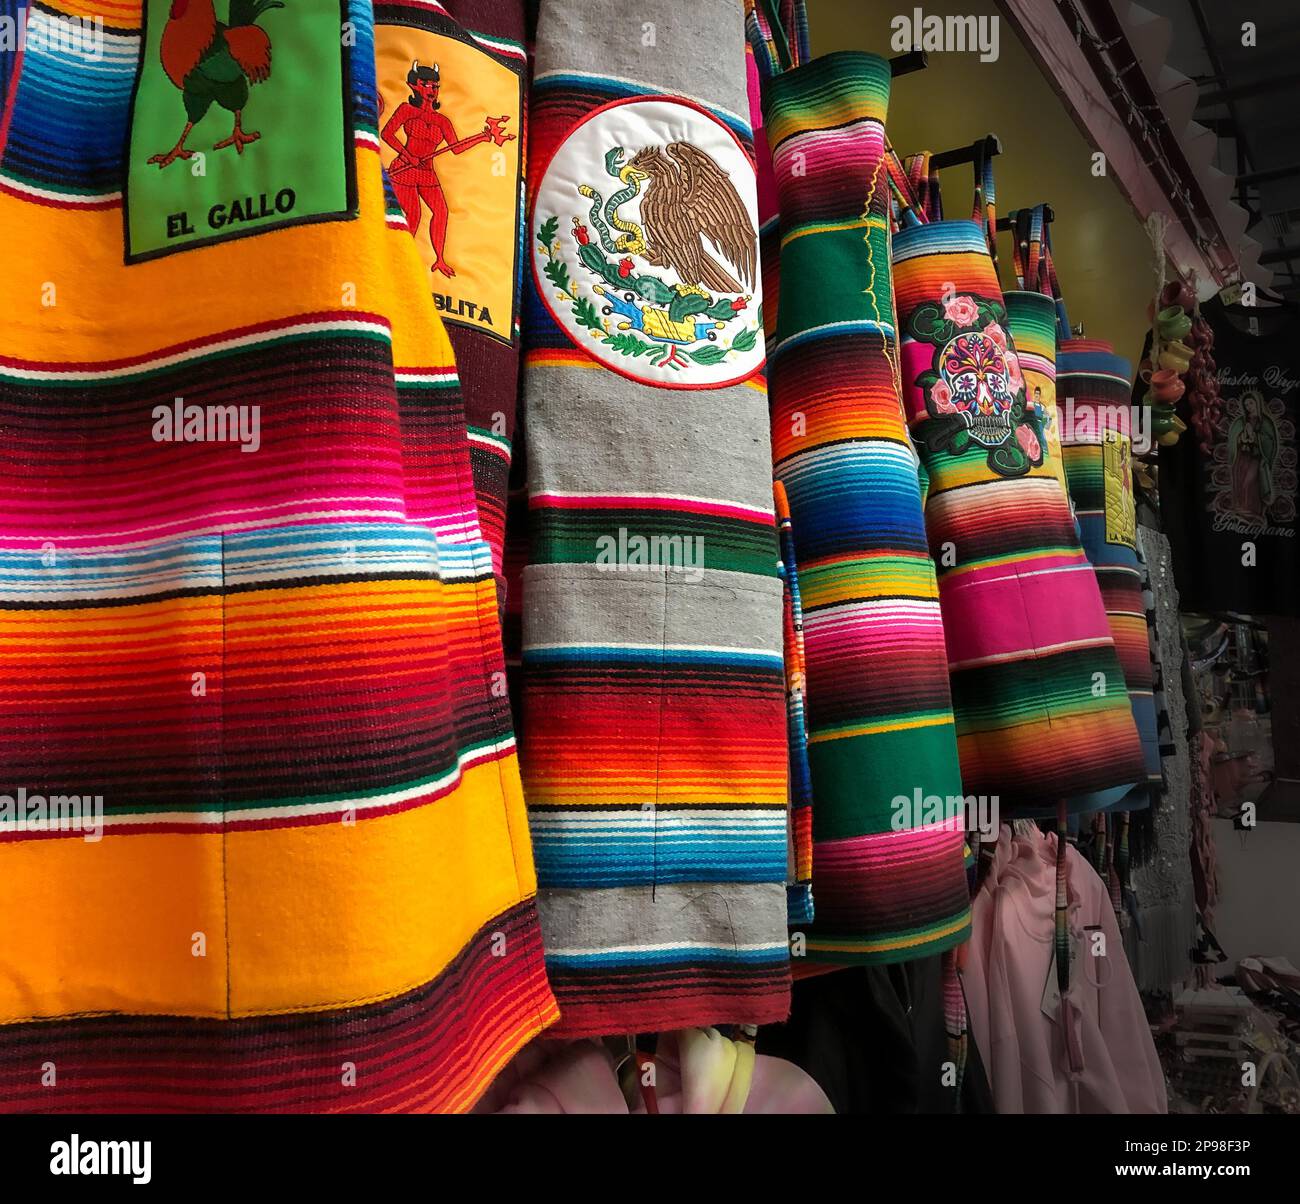 Several colorful cloth aprons on display for sale in a tourist bazaar shop with traditional items from Mexico. Stock Photo